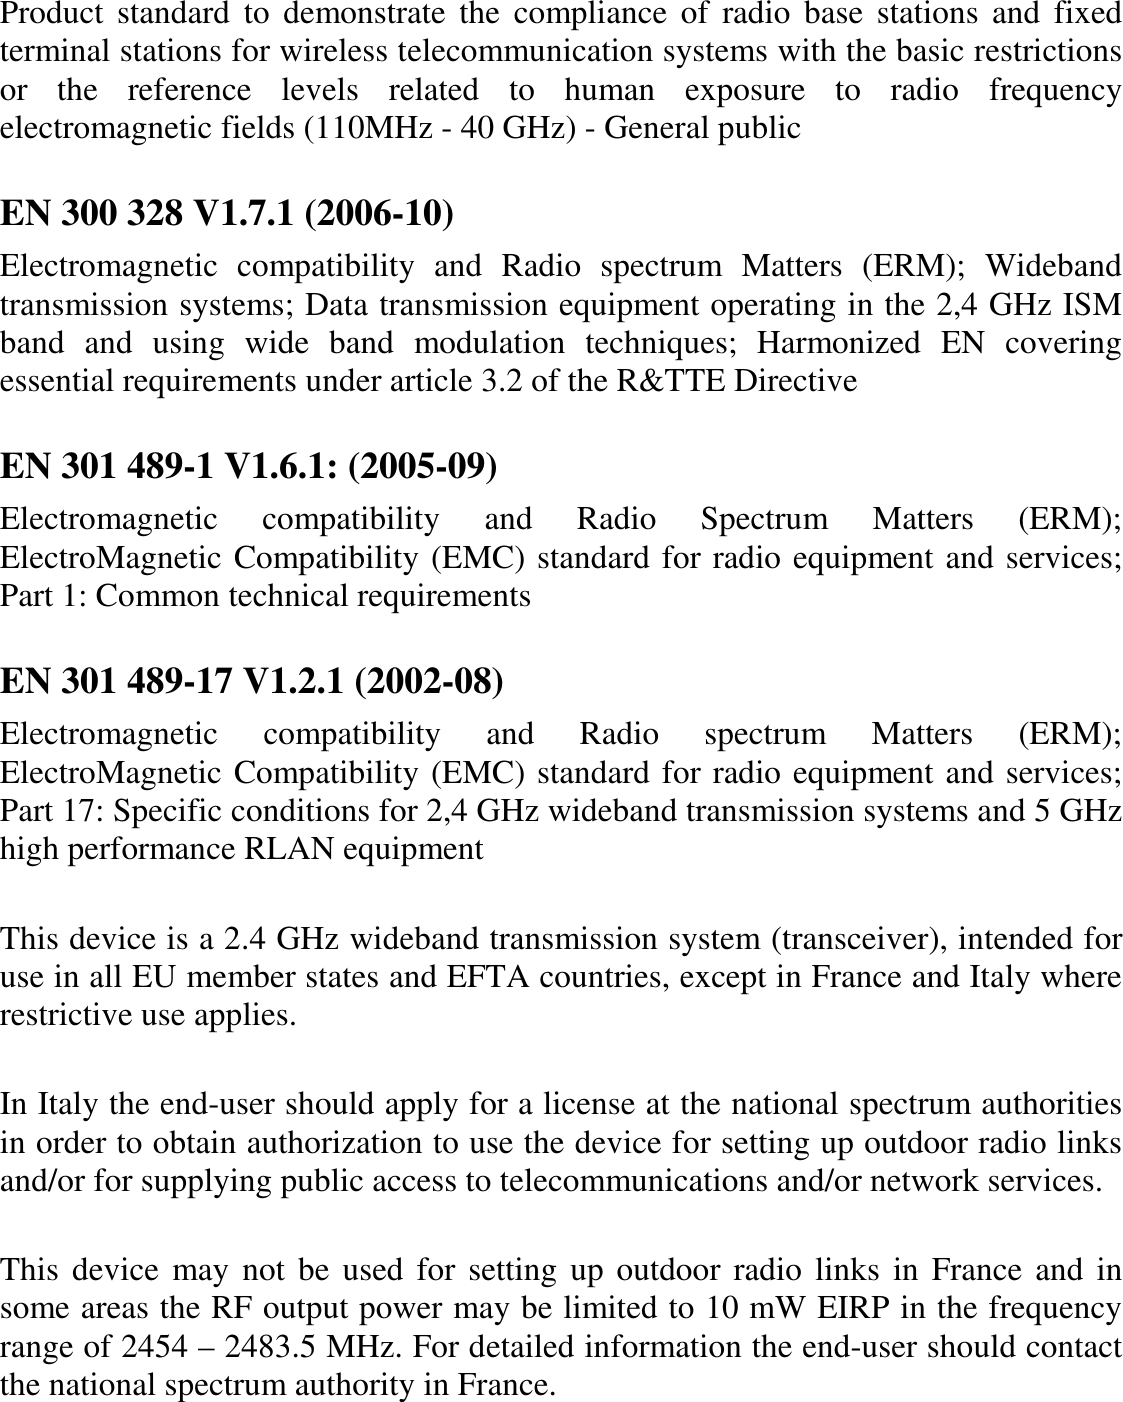 Product  standard  to  demonstrate  the  compliance  of  radio  base  stations and  fixed terminal stations for wireless telecommunication systems with the basic restrictions or  the  reference  levels  related  to  human  exposure  to  radio  frequency electromagnetic fields (110MHz - 40 GHz) - General public  EN 300 328 V1.7.1 (2006-10) Electromagnetic  compatibility  and  Radio  spectrum  Matters  (ERM);  Wideband transmission systems; Data transmission equipment operating in the 2,4 GHz ISM band  and  using  wide  band  modulation  techniques;  Harmonized  EN  covering essential requirements under article 3.2 of the R&amp;TTE Directive  EN 301 489-1 V1.6.1: (2005-09) Electromagnetic  compatibility  and  Radio  Spectrum  Matters  (ERM); ElectroMagnetic Compatibility (EMC) standard for radio equipment and services; Part 1: Common technical requirements  EN 301 489-17 V1.2.1 (2002-08)  Electromagnetic  compatibility  and  Radio  spectrum  Matters  (ERM); ElectroMagnetic Compatibility (EMC) standard for radio equipment and services; Part 17: Specific conditions for 2,4 GHz wideband transmission systems and 5 GHz high performance RLAN equipment  This device is a 2.4 GHz wideband transmission system (transceiver), intended for use in all EU member states and EFTA countries, except in France and Italy where restrictive use applies.  In Italy the end-user should apply for a license at the national spectrum authorities in order to obtain authorization to use the device for setting up outdoor radio links and/or for supplying public access to telecommunications and/or network services.  This device  may not be used  for setting up outdoor radio links in France and in some areas the RF output power may be limited to 10 mW EIRP in the frequency range of 2454 – 2483.5 MHz. For detailed information the end-user should contact the national spectrum authority in France.  